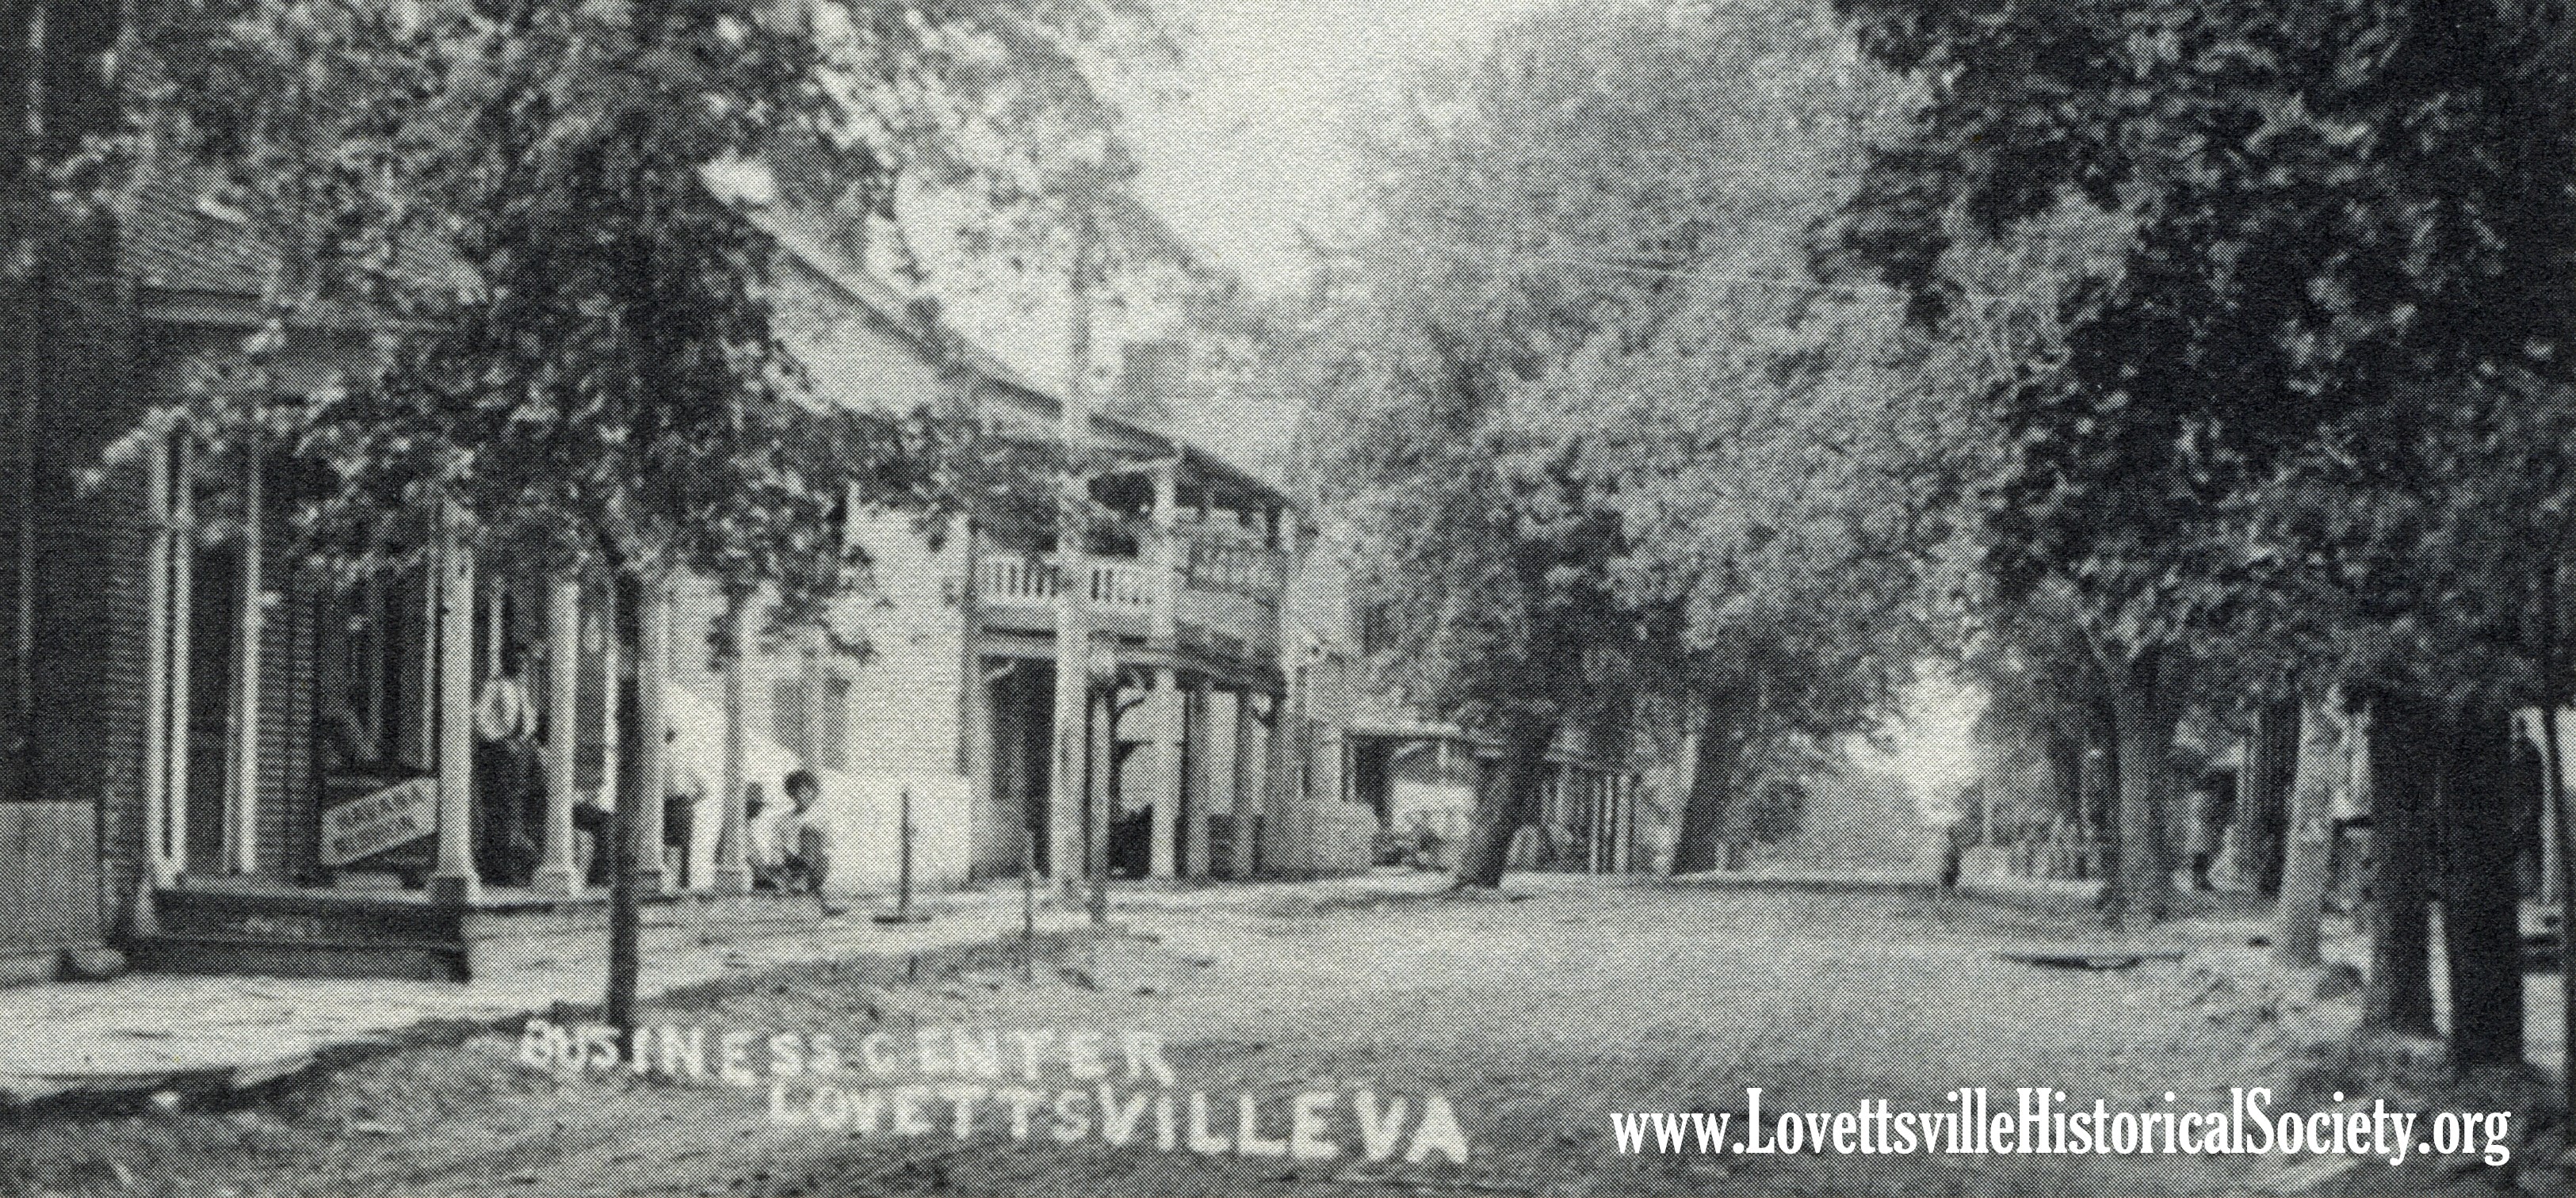 Thumbnail for the post titled: “Know All Men by These Presents:”    Taverns and Houses of Entertainment in Old Lovettsville